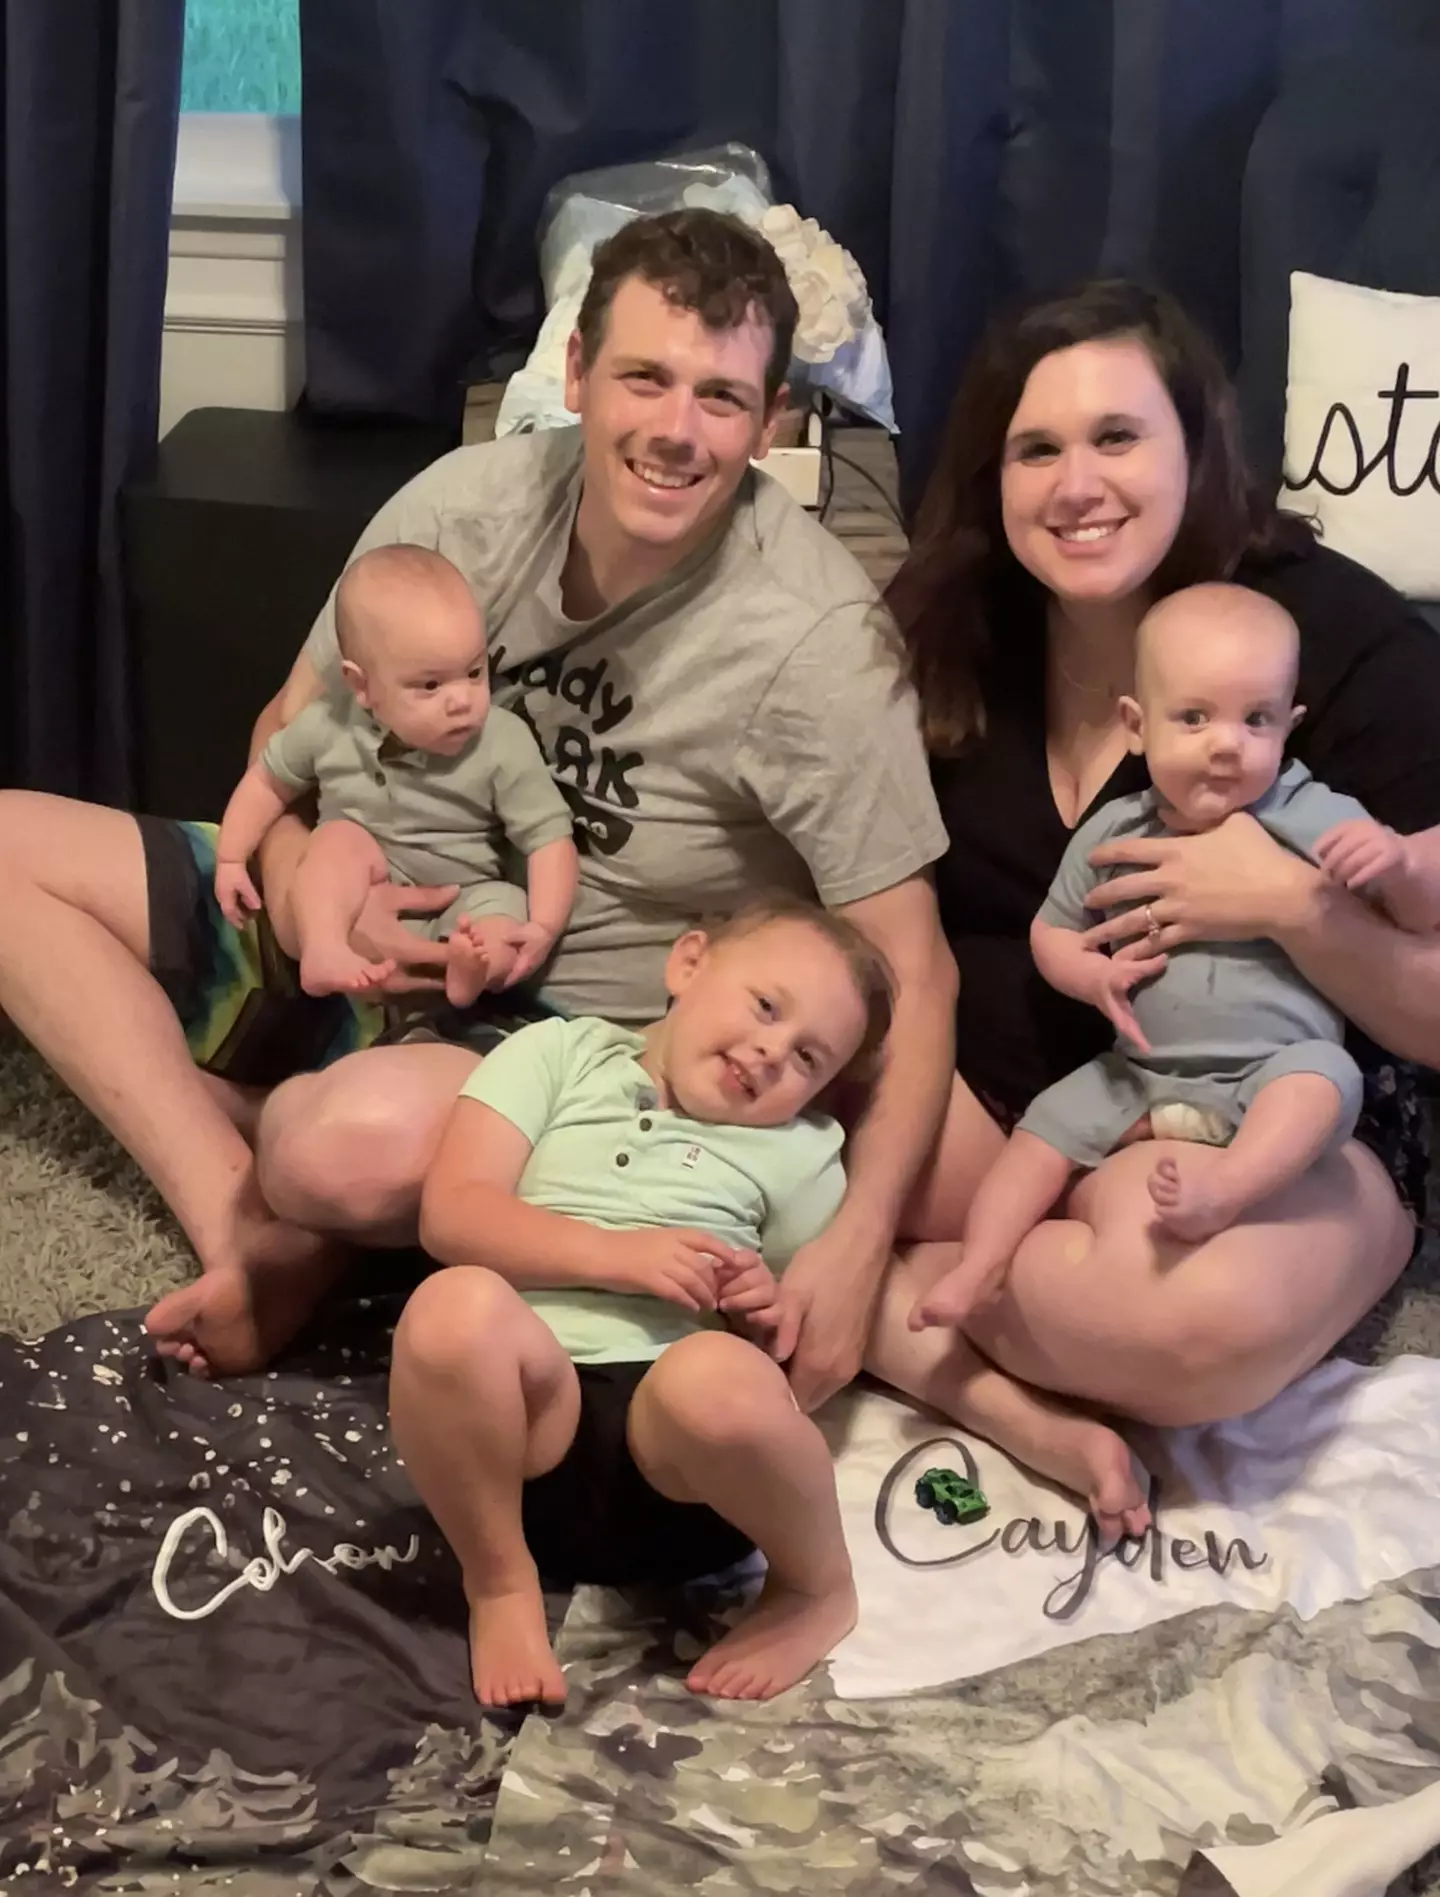 The couple welcomed Colson and Cayden into the world last year.